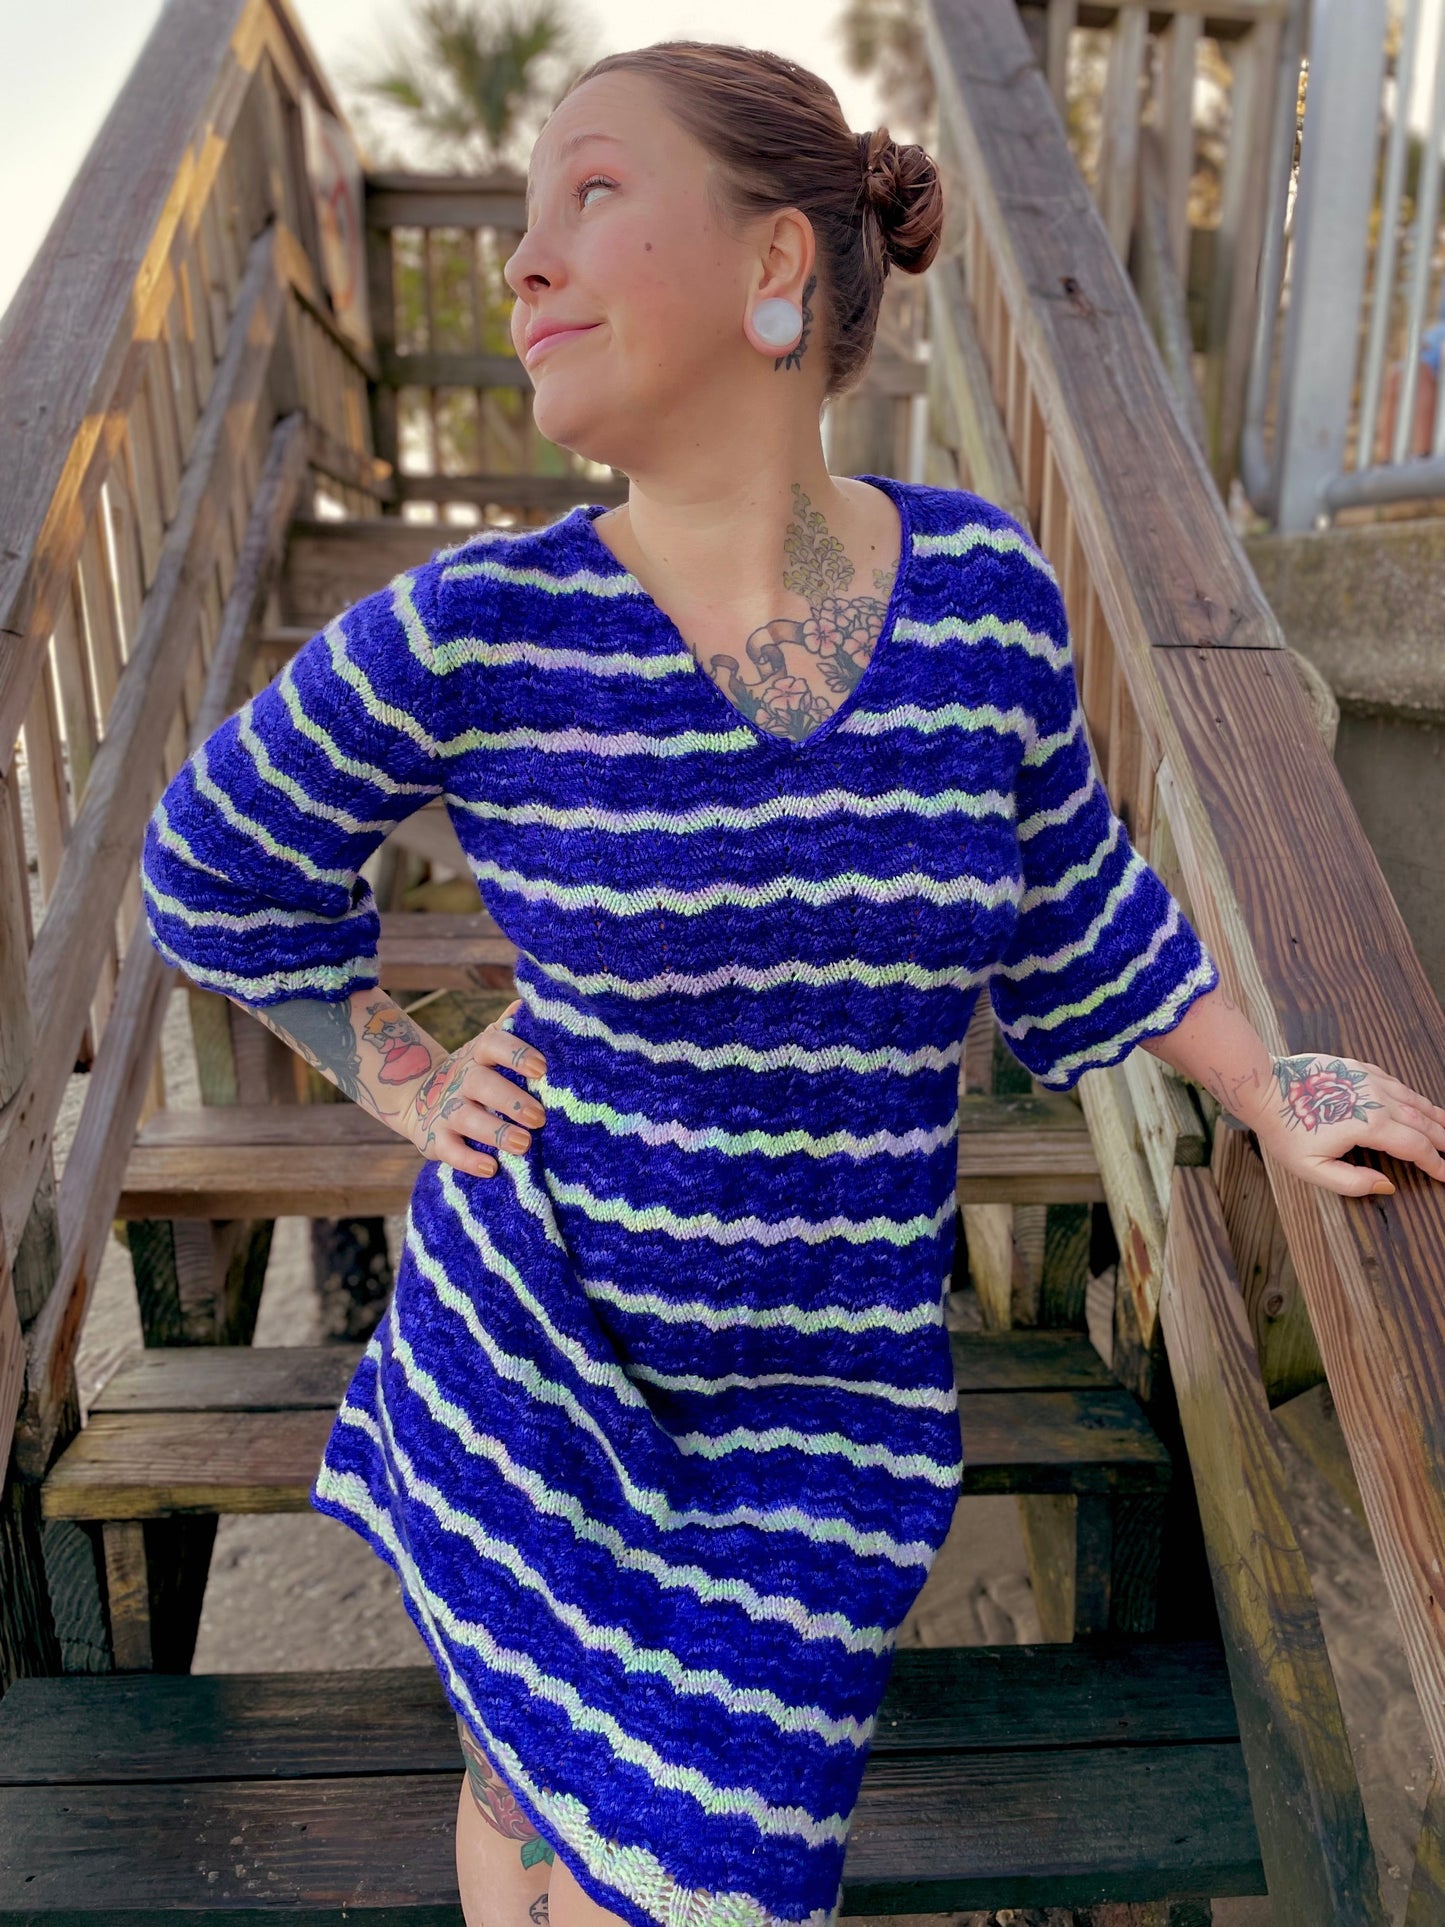 Bess stands on a deck staircase, looking off camera with one hand on her hip. She wears a blue and white dress, knit with a feather and fan stitch and 3/4 length sleeves.